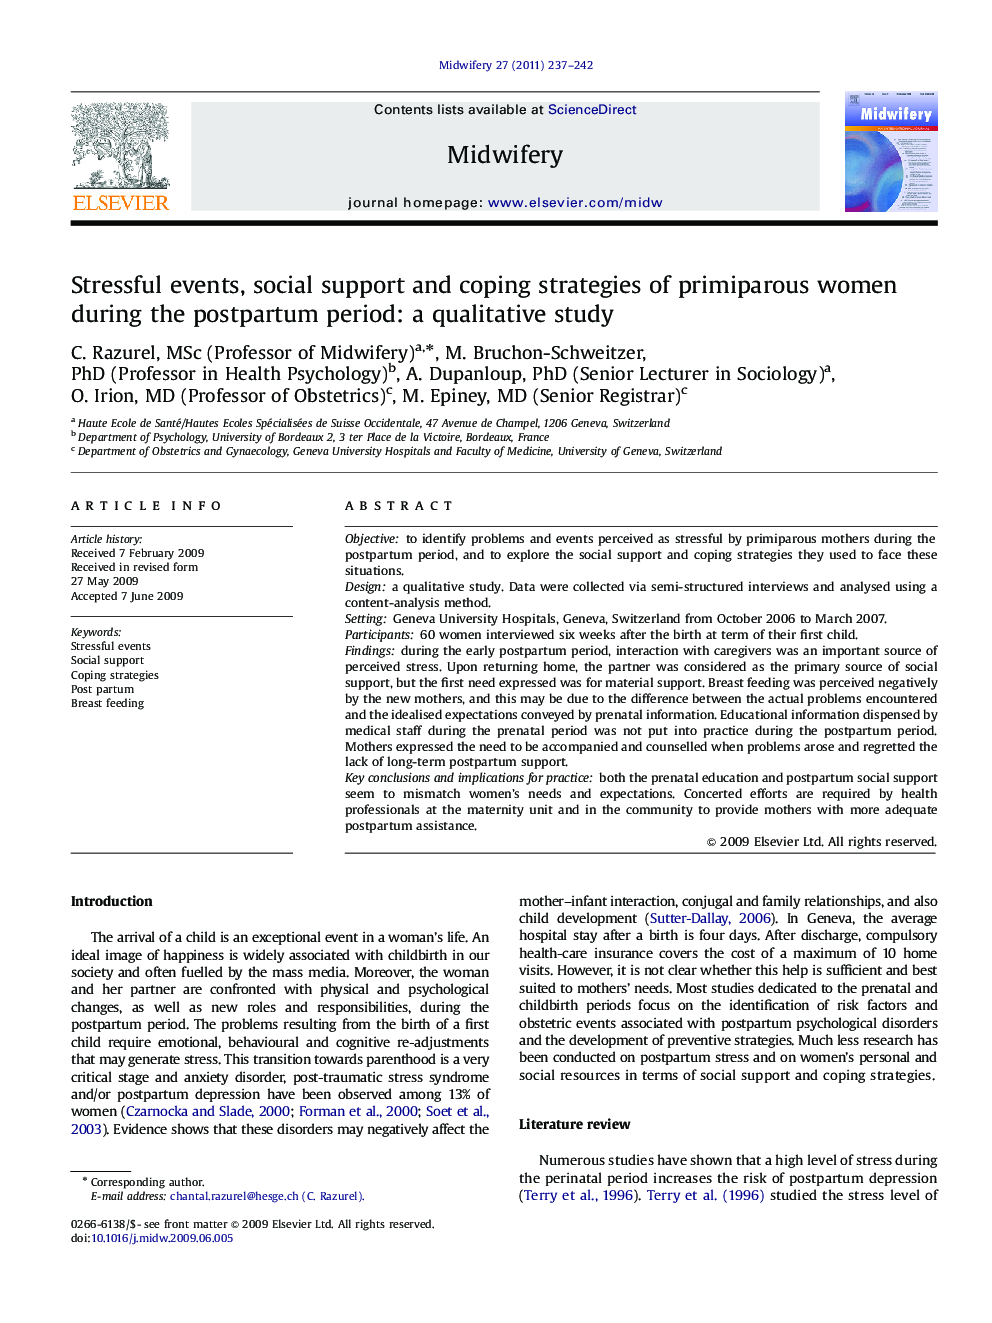 Stressful events, social support and coping strategies of primiparous women during the postpartum period: a qualitative study